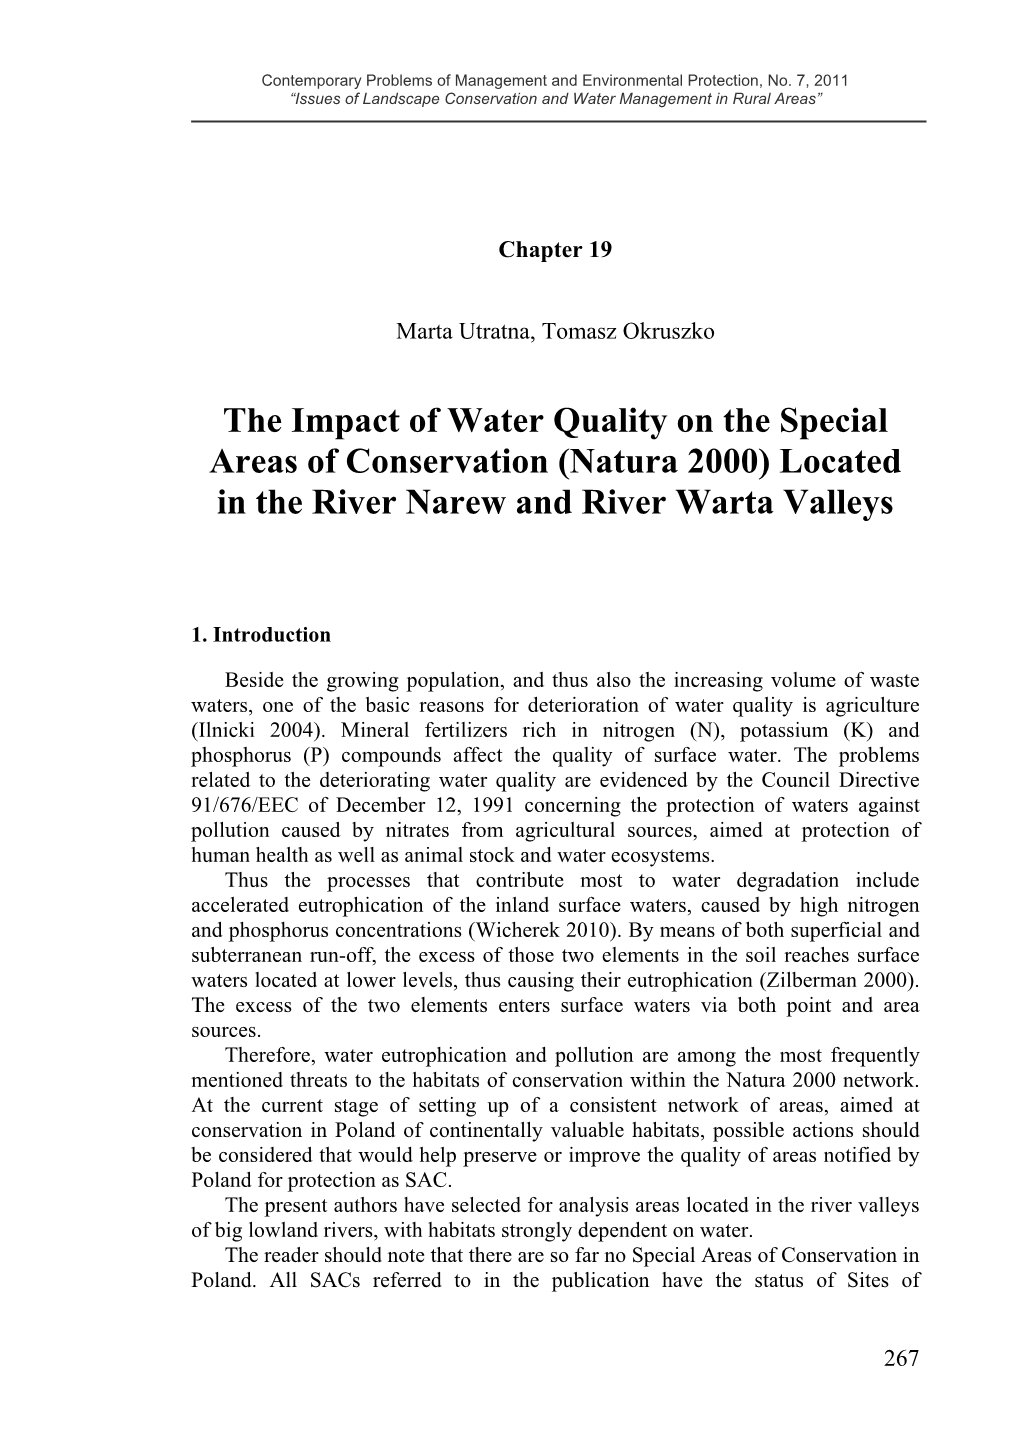 The Impact of Water Quality on the Special Areas of Conservation (Natura 2000) Located in the River Narew and River Warta Valleys